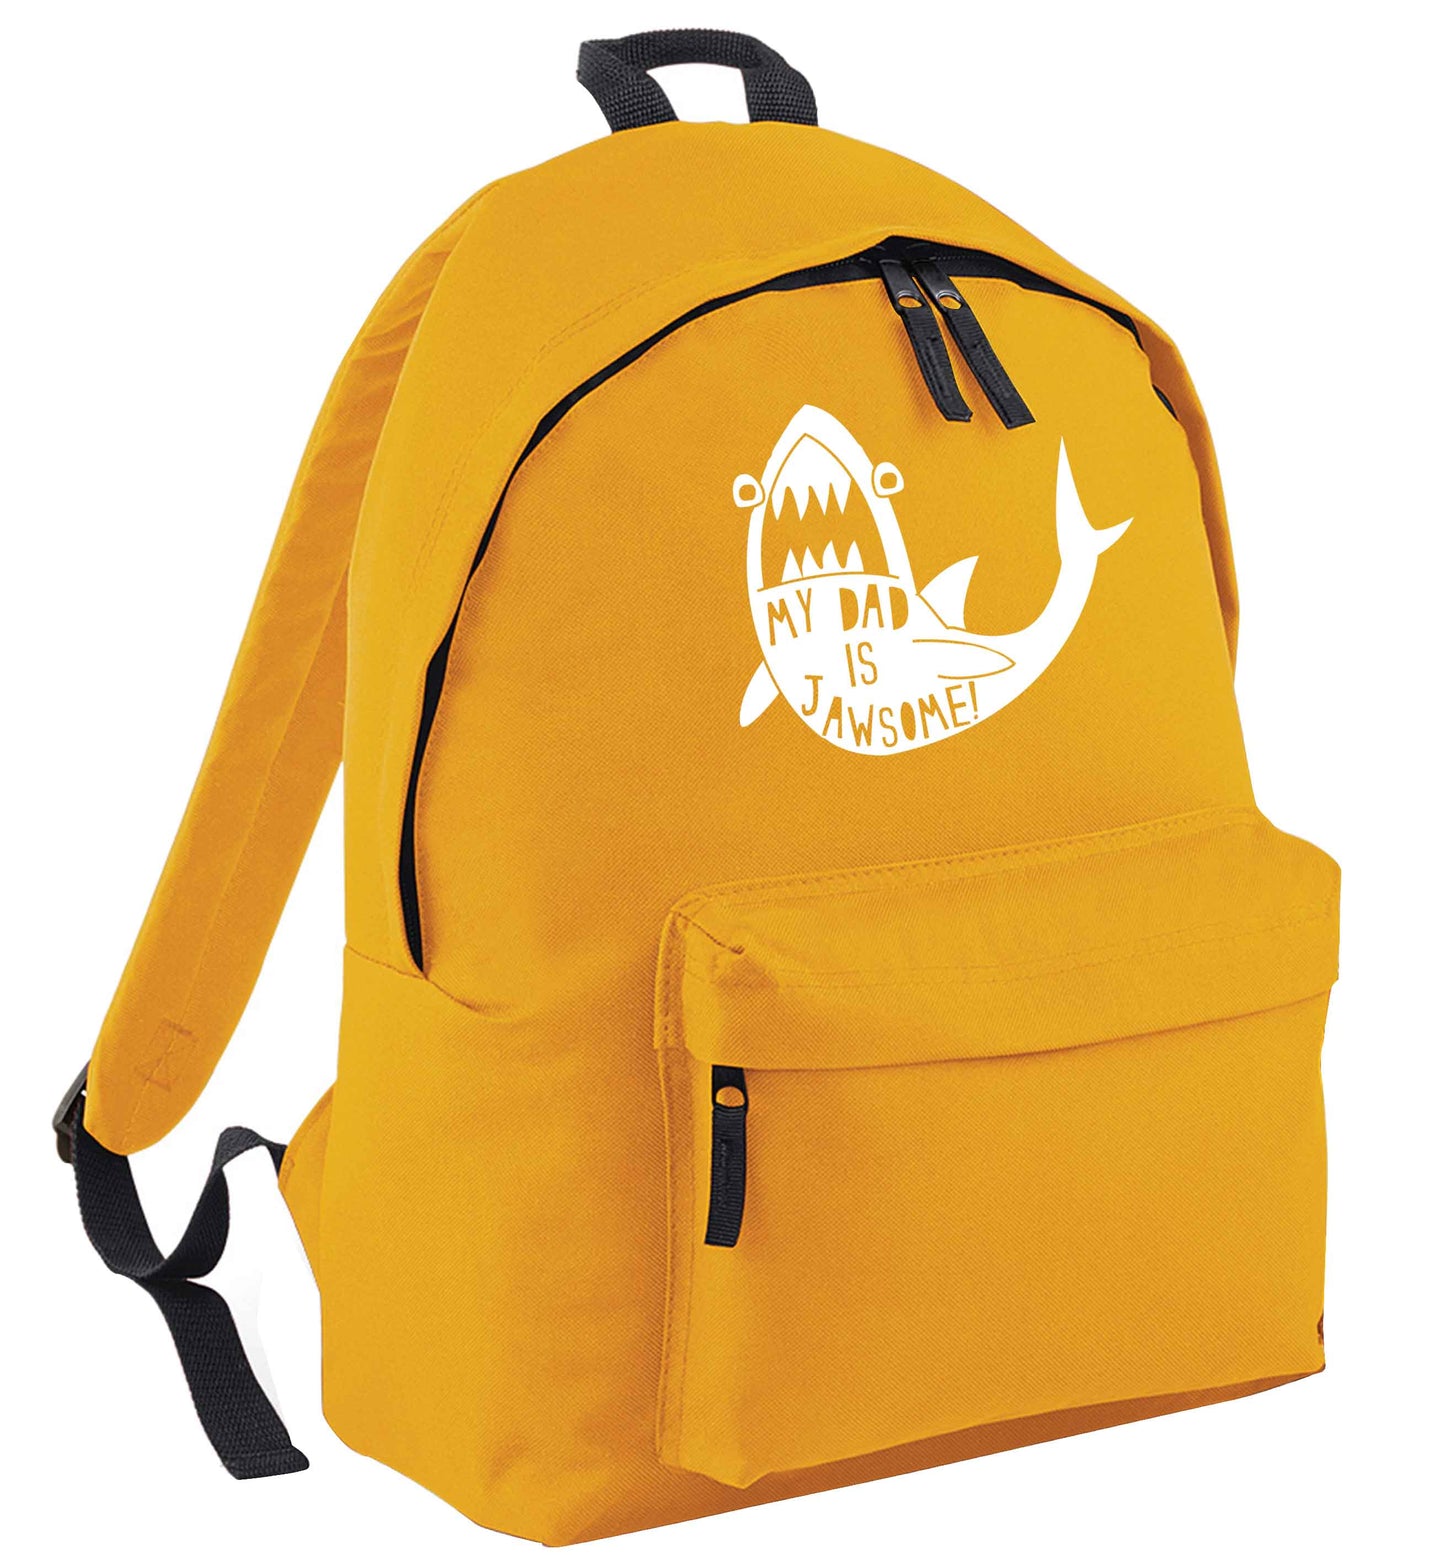 My Dad is jawsome mustard adults backpack